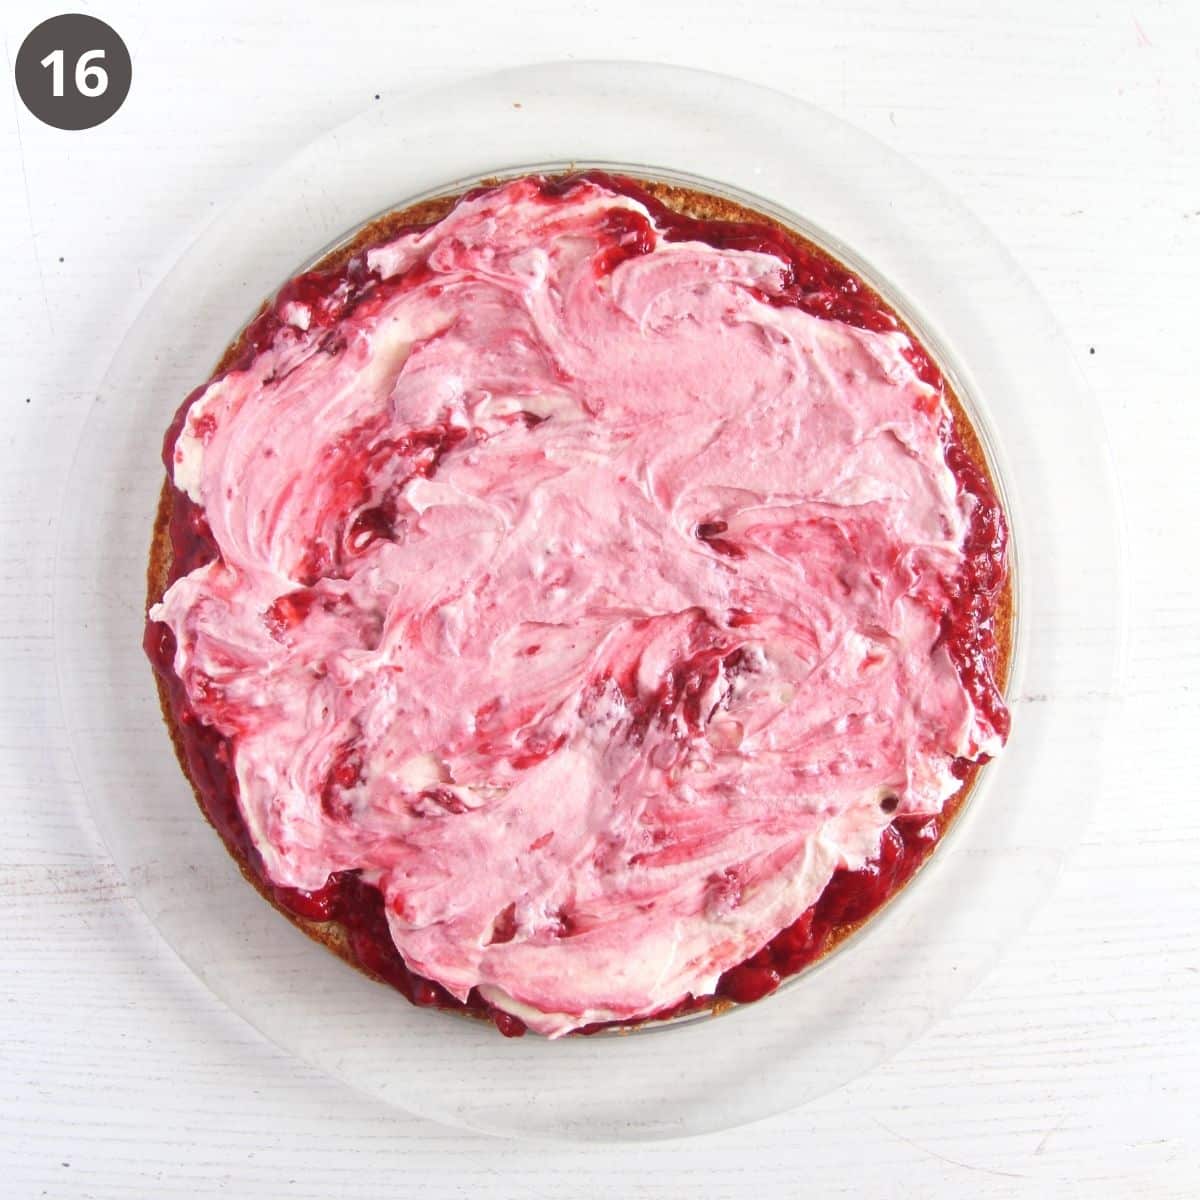 spreading raspberry sauce and frosting on a layer of cake.